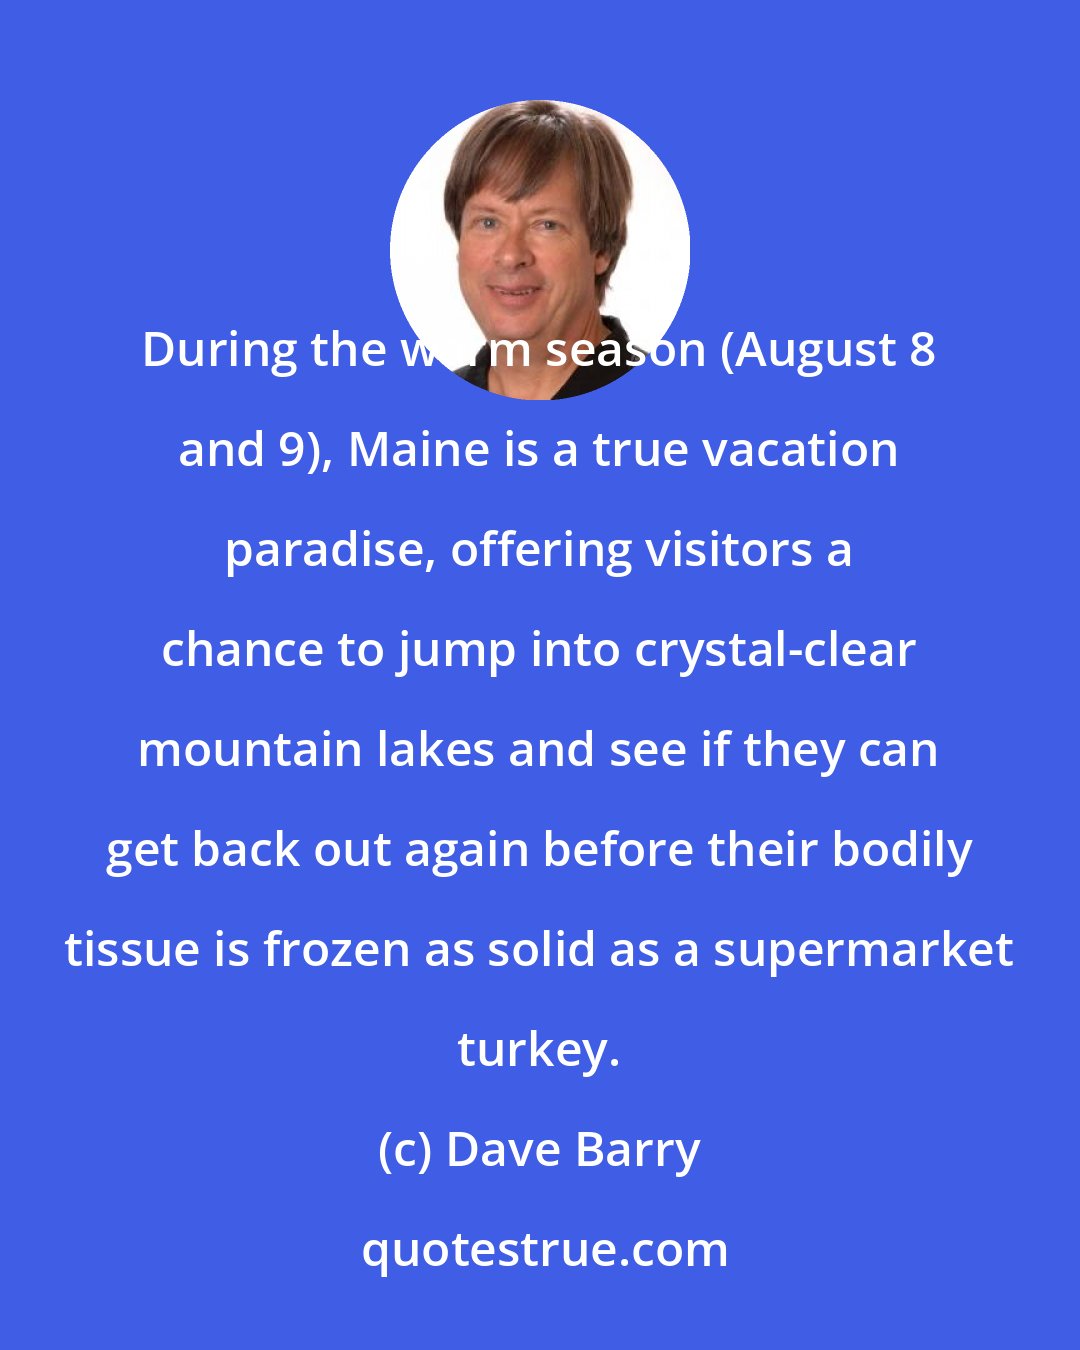 Dave Barry: During the warm season (August 8 and 9), Maine is a true vacation paradise, offering visitors a chance to jump into crystal-clear mountain lakes and see if they can get back out again before their bodily tissue is frozen as solid as a supermarket turkey.